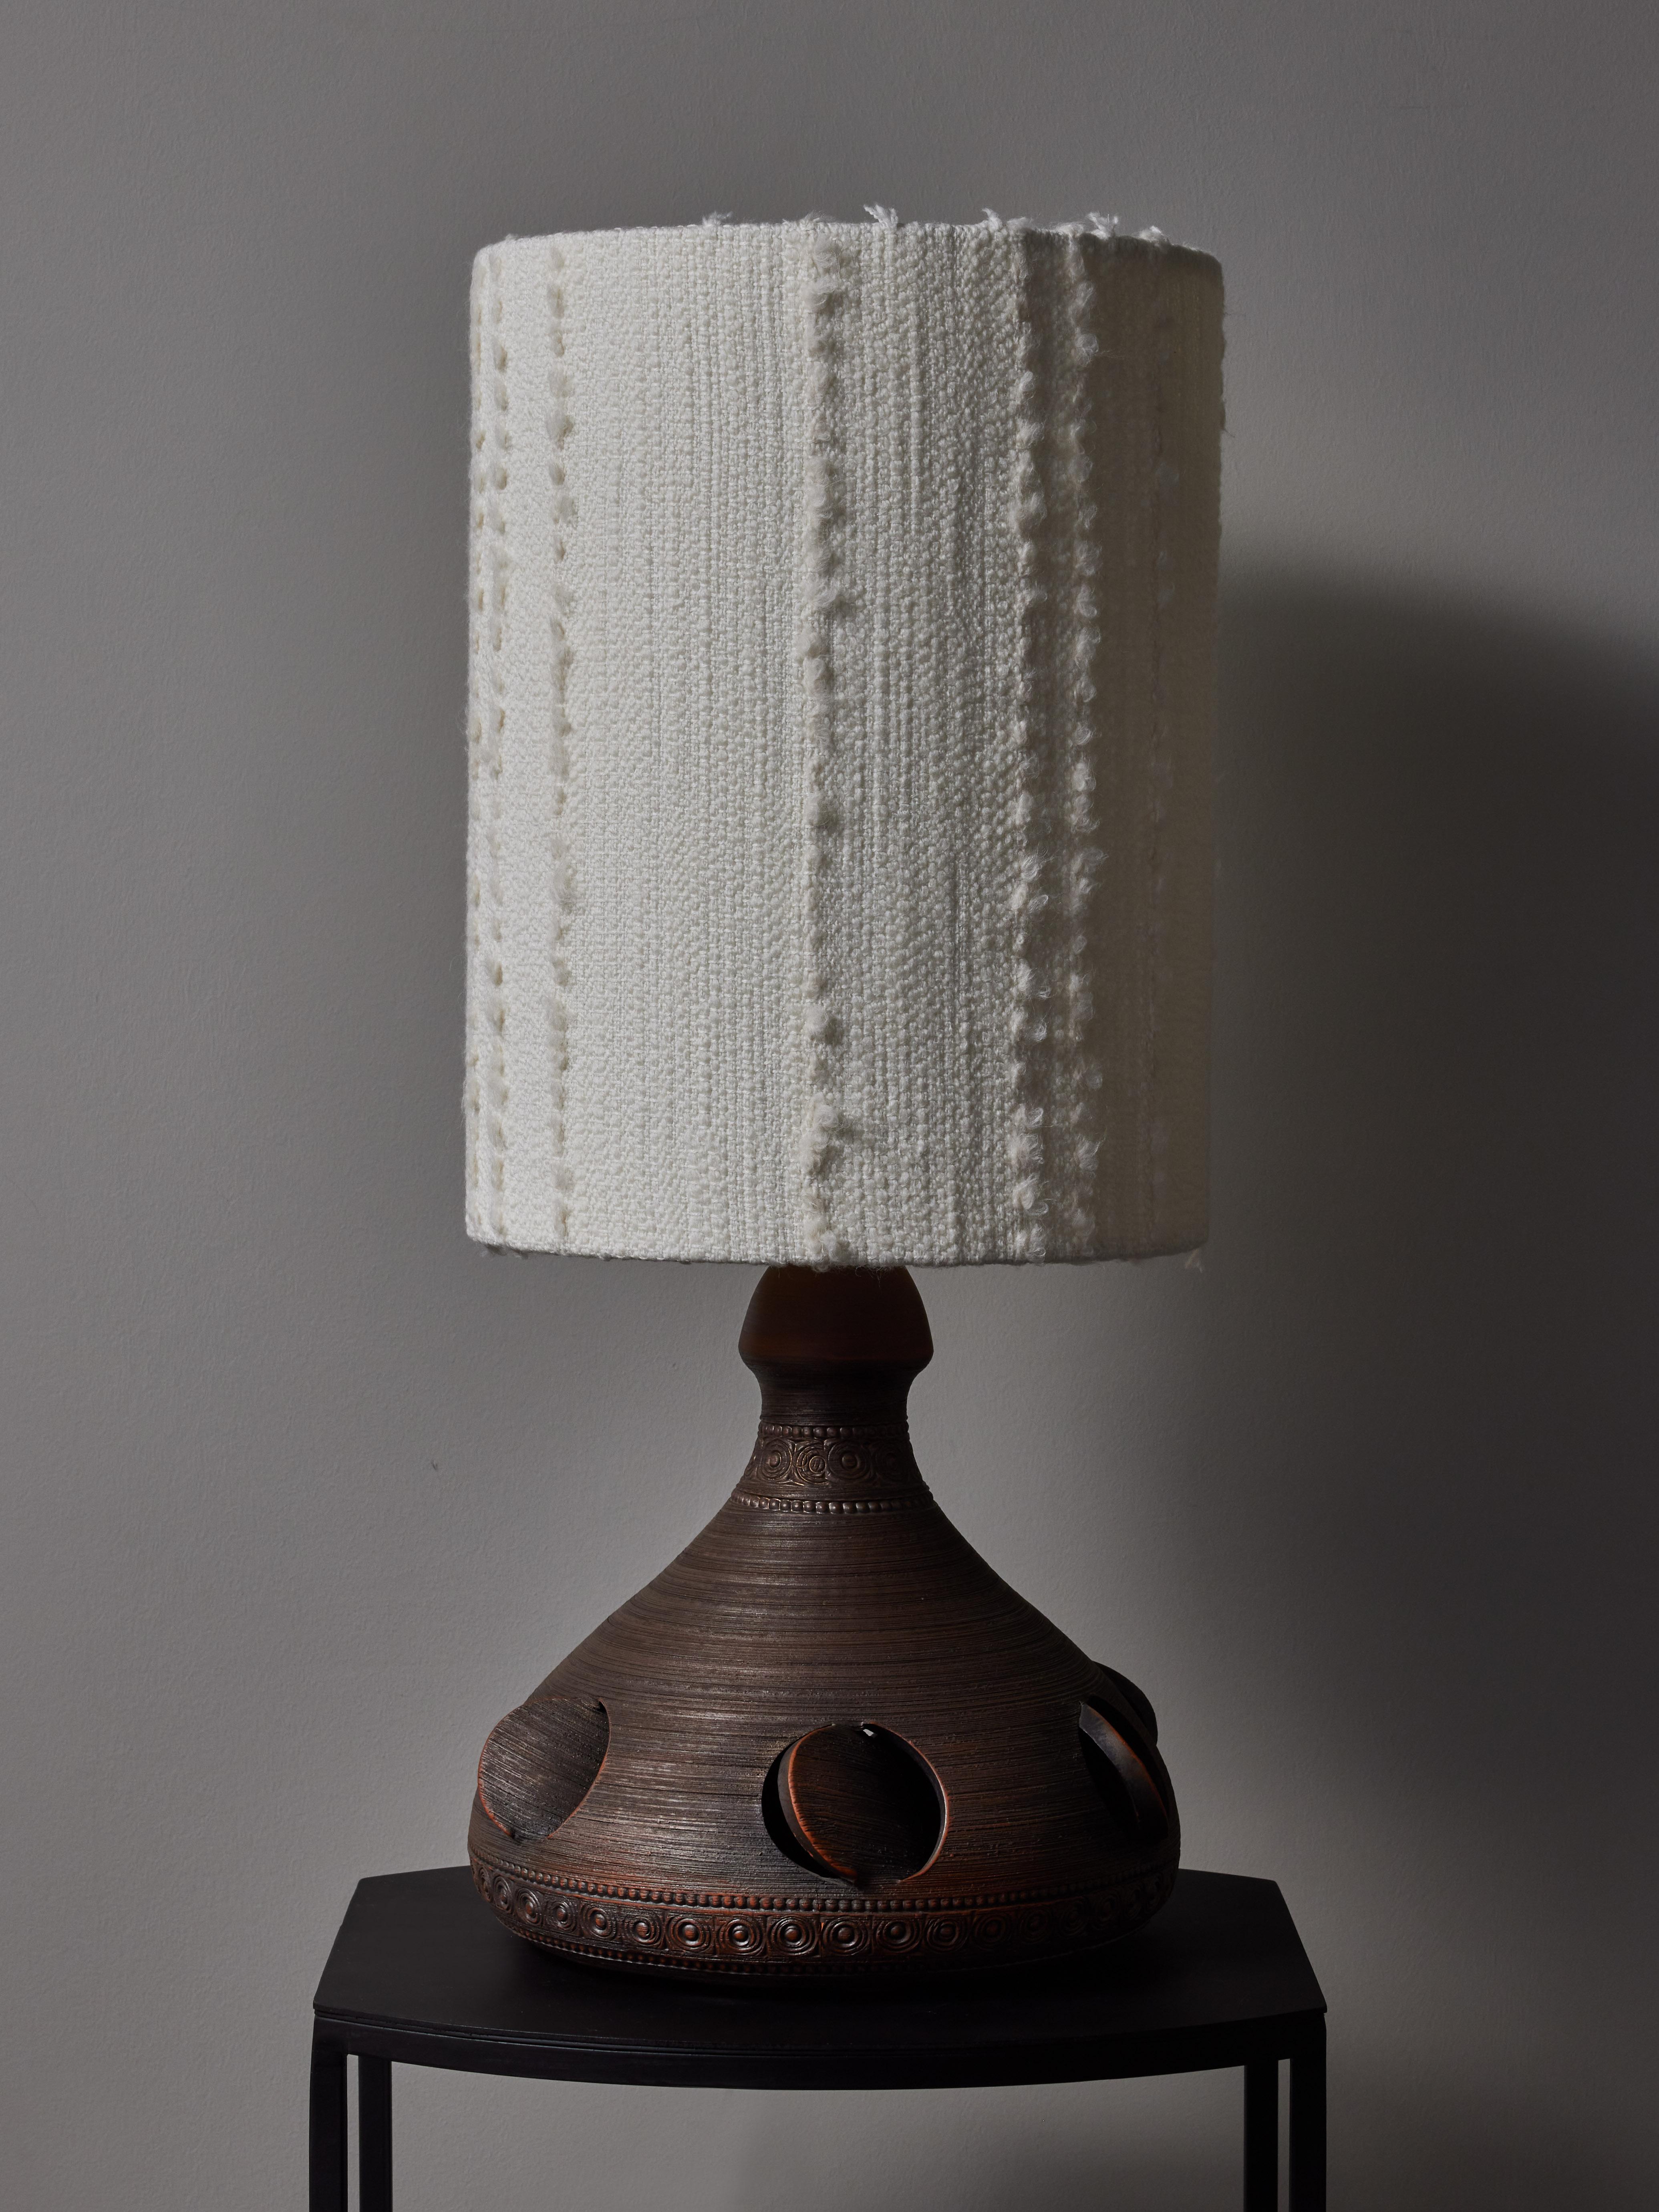 Vintage french ceramic table lamp with scarred decors.

New lamphade.